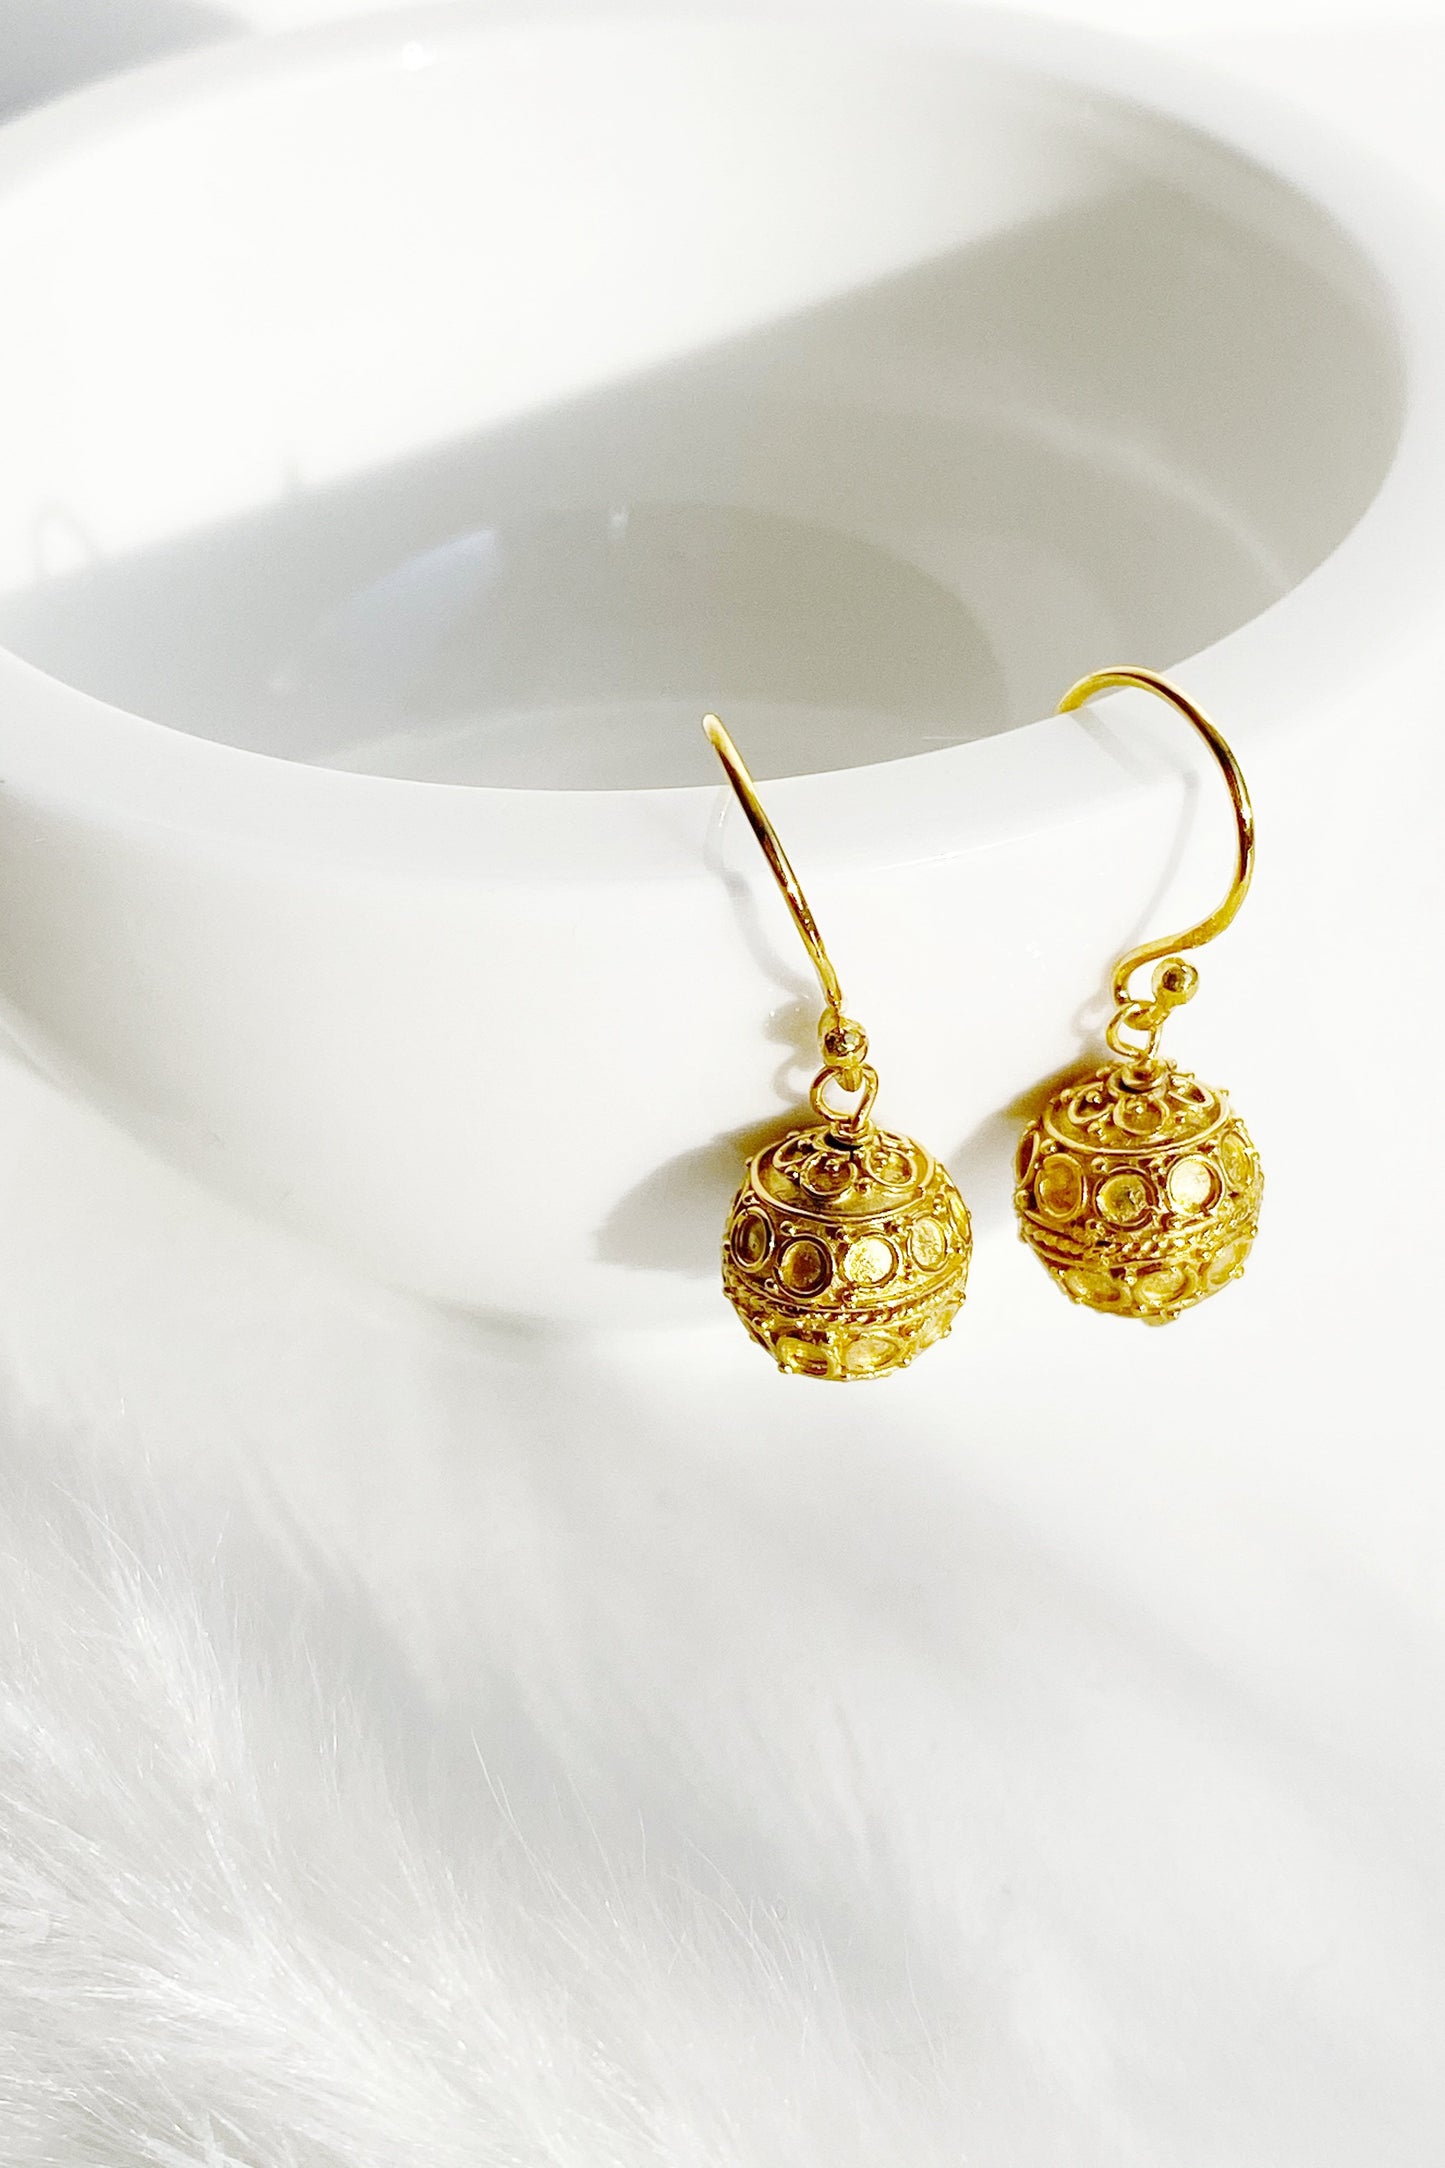 Circle Design Harmony Ball Earrings hanging from a rim